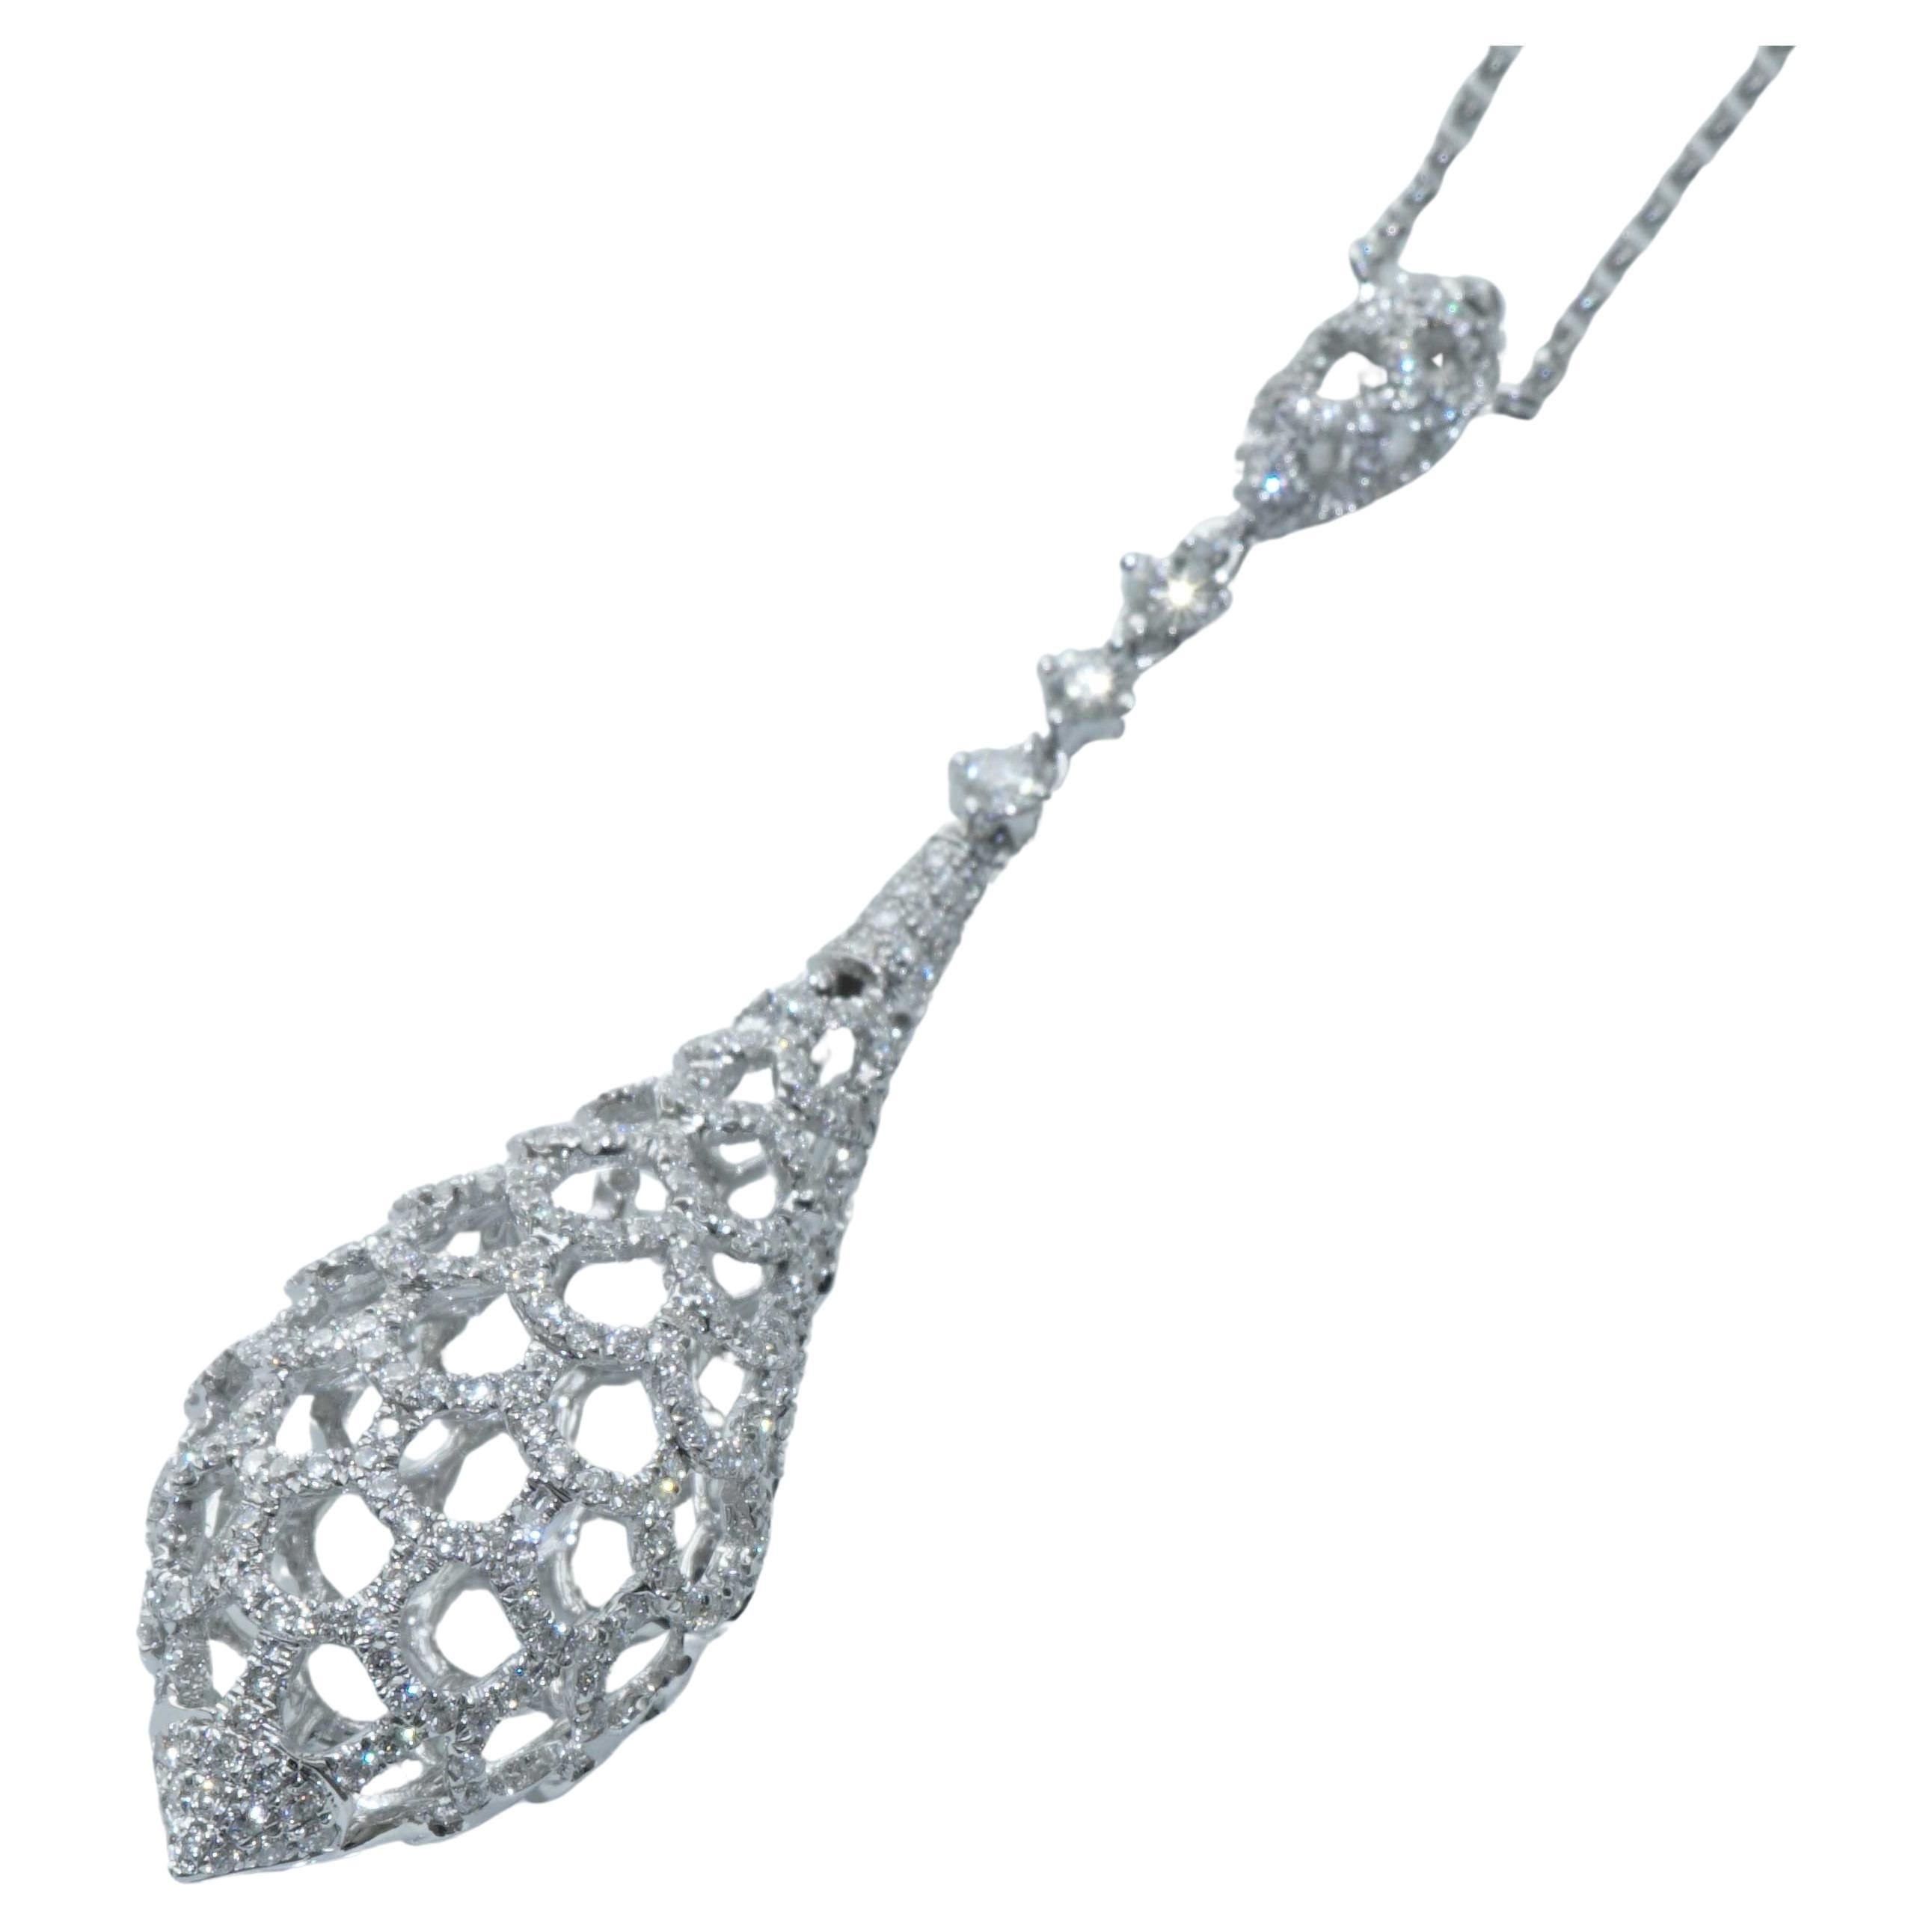 never seen exciting lattice shape pointed teardrop completely pierced in a flowing teardrop shape set with full-cut brilliant-cut diamonds with full-cut brilliant-cut diamonds totaling approx. 1.10 ct, TW-W / VVS-VS (very very small inclusions -